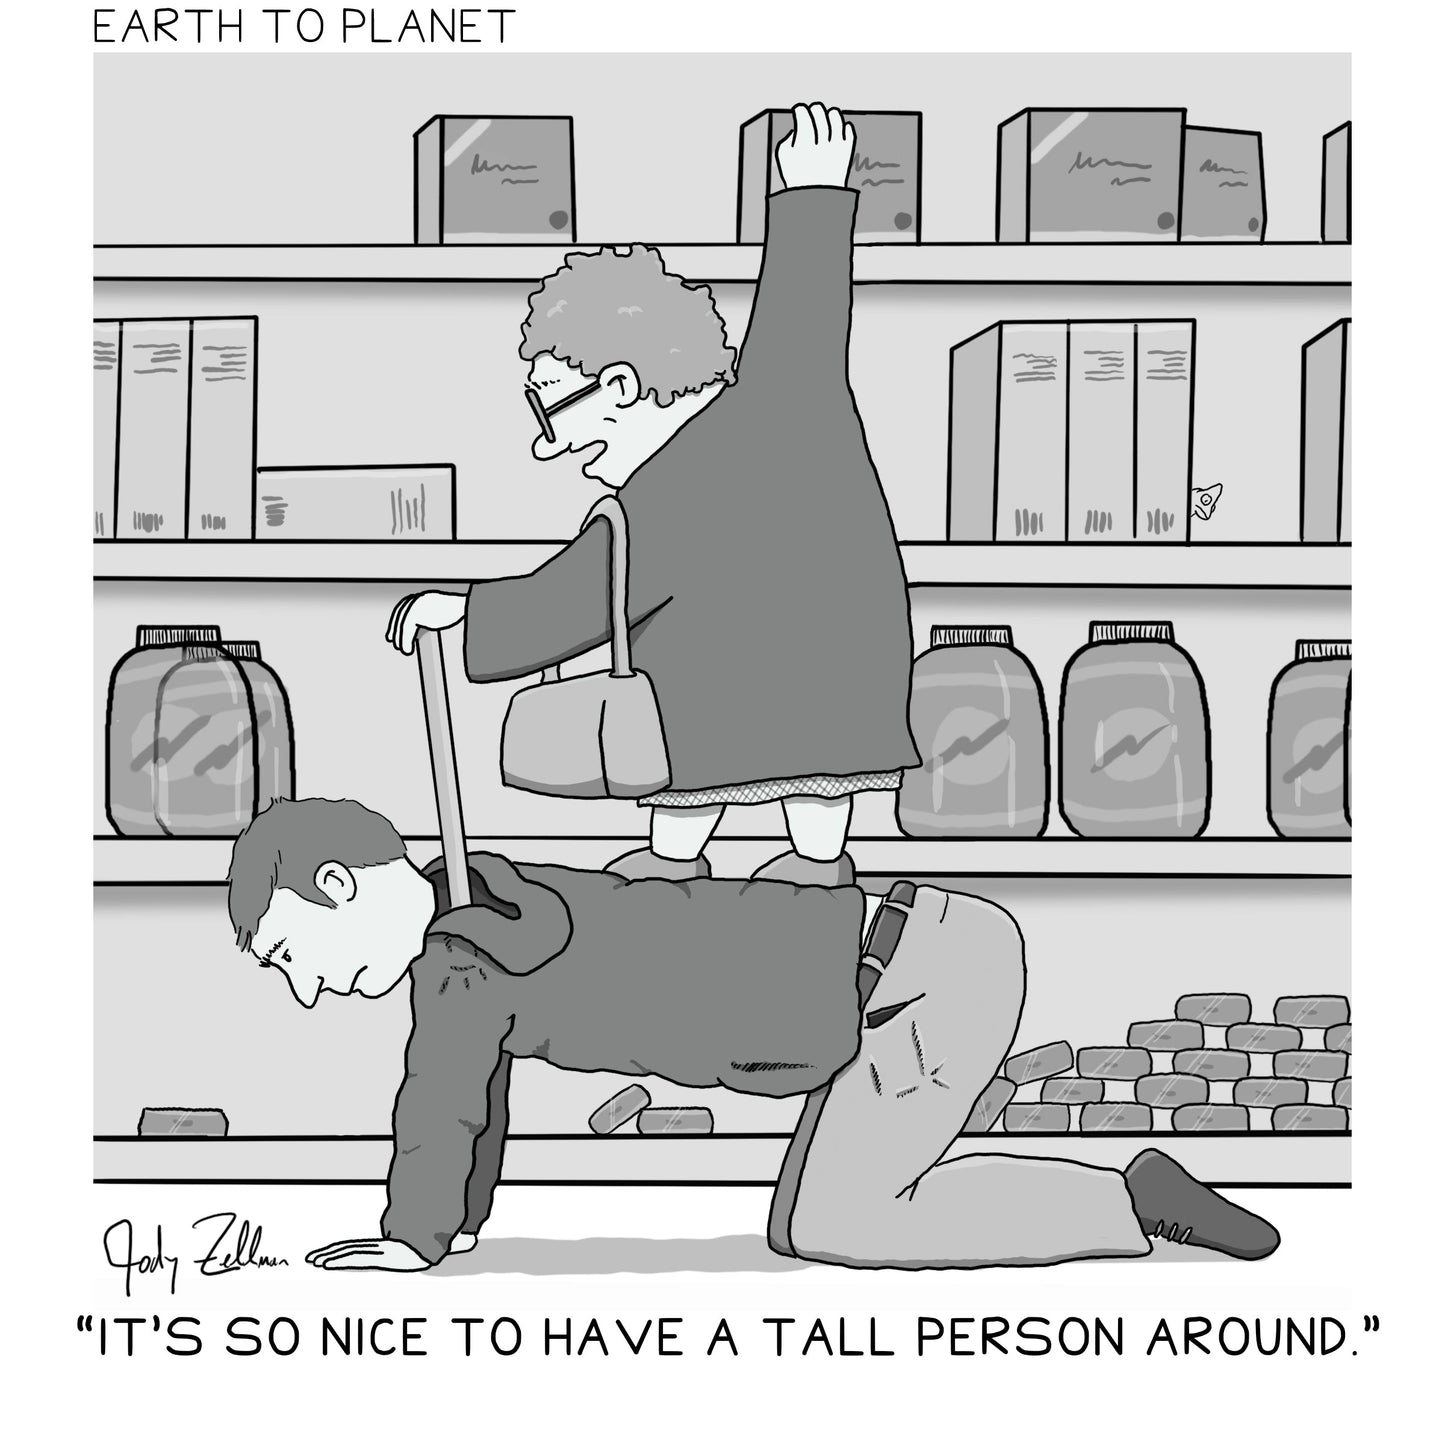 Tall Person